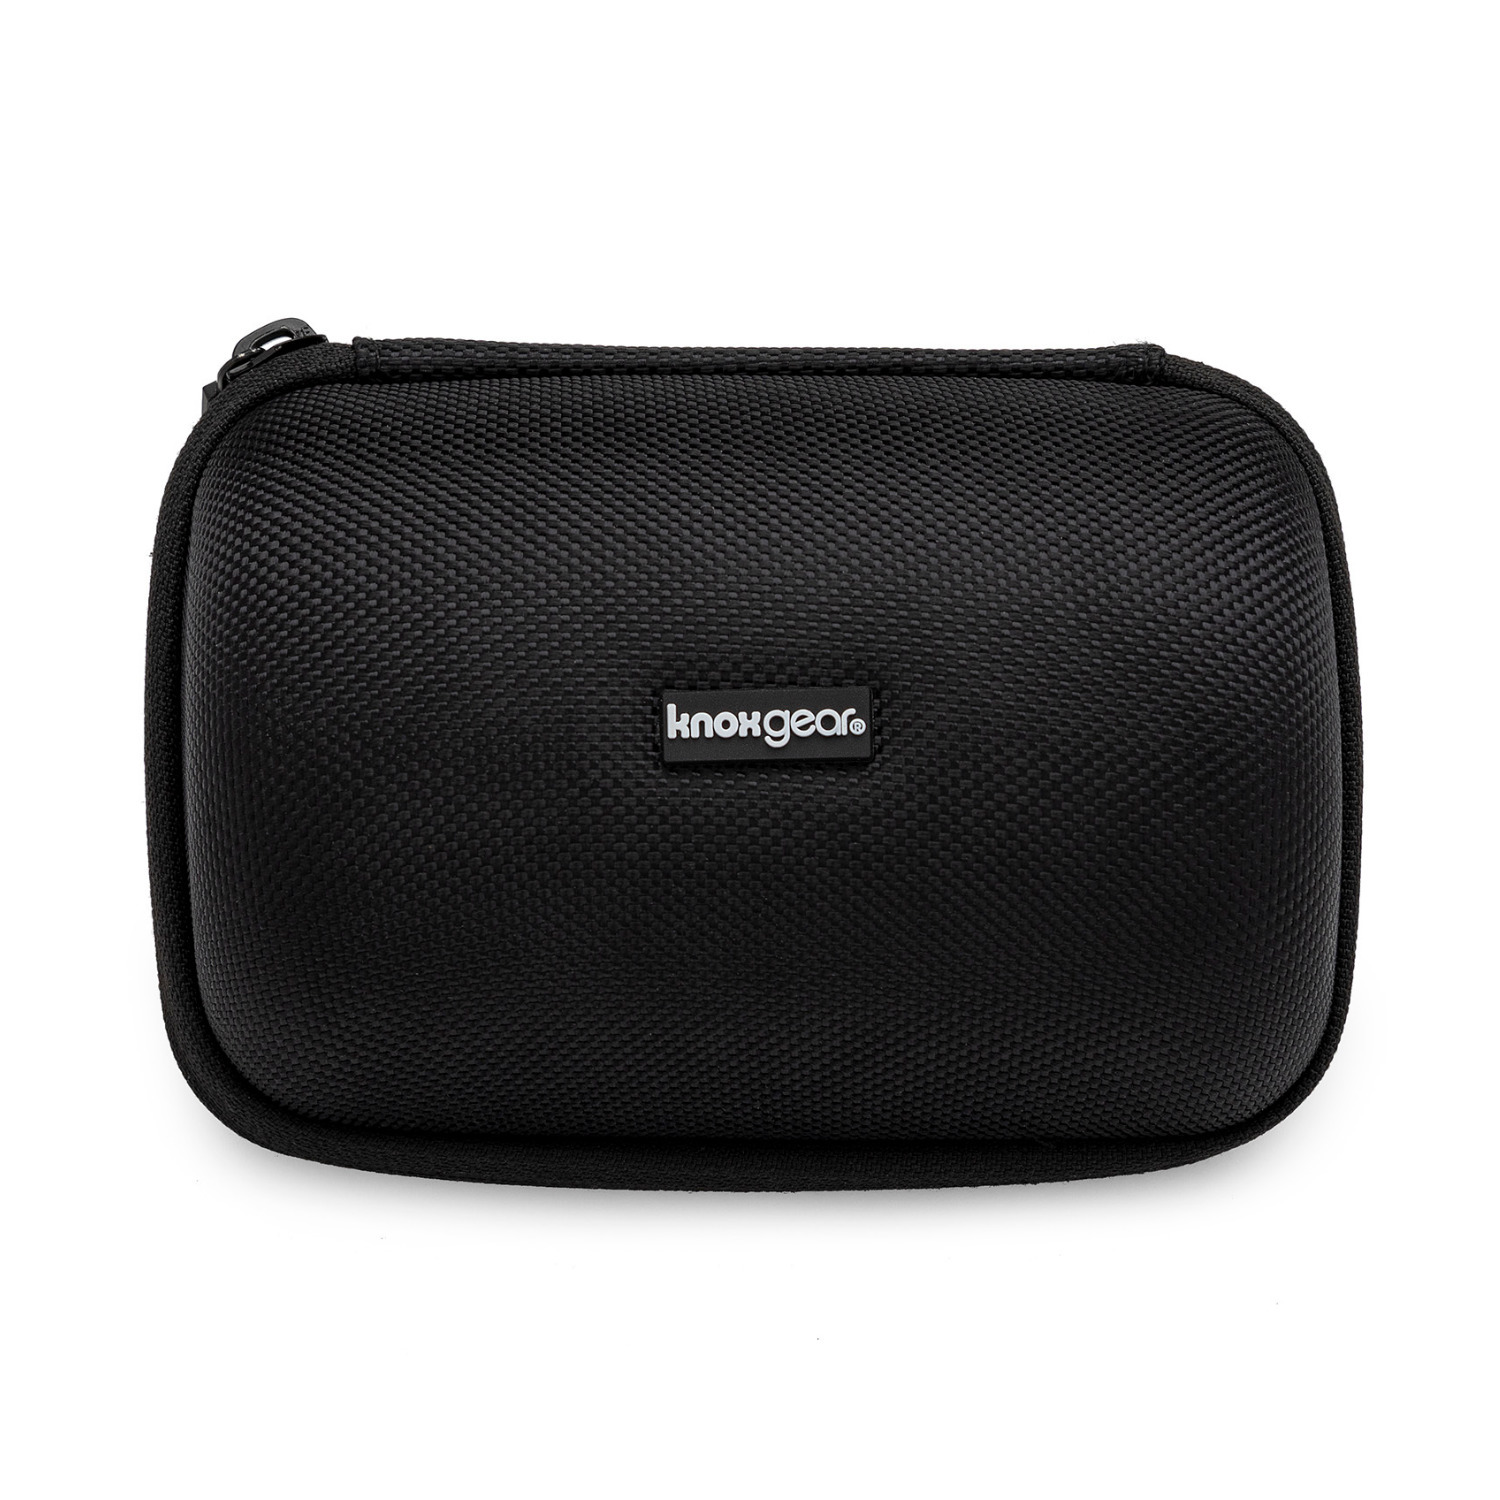 Knox Gear Hard Shell Case Compatible with Sony SRSXB10 & SRSXB12 Speakers - image 2 of 4